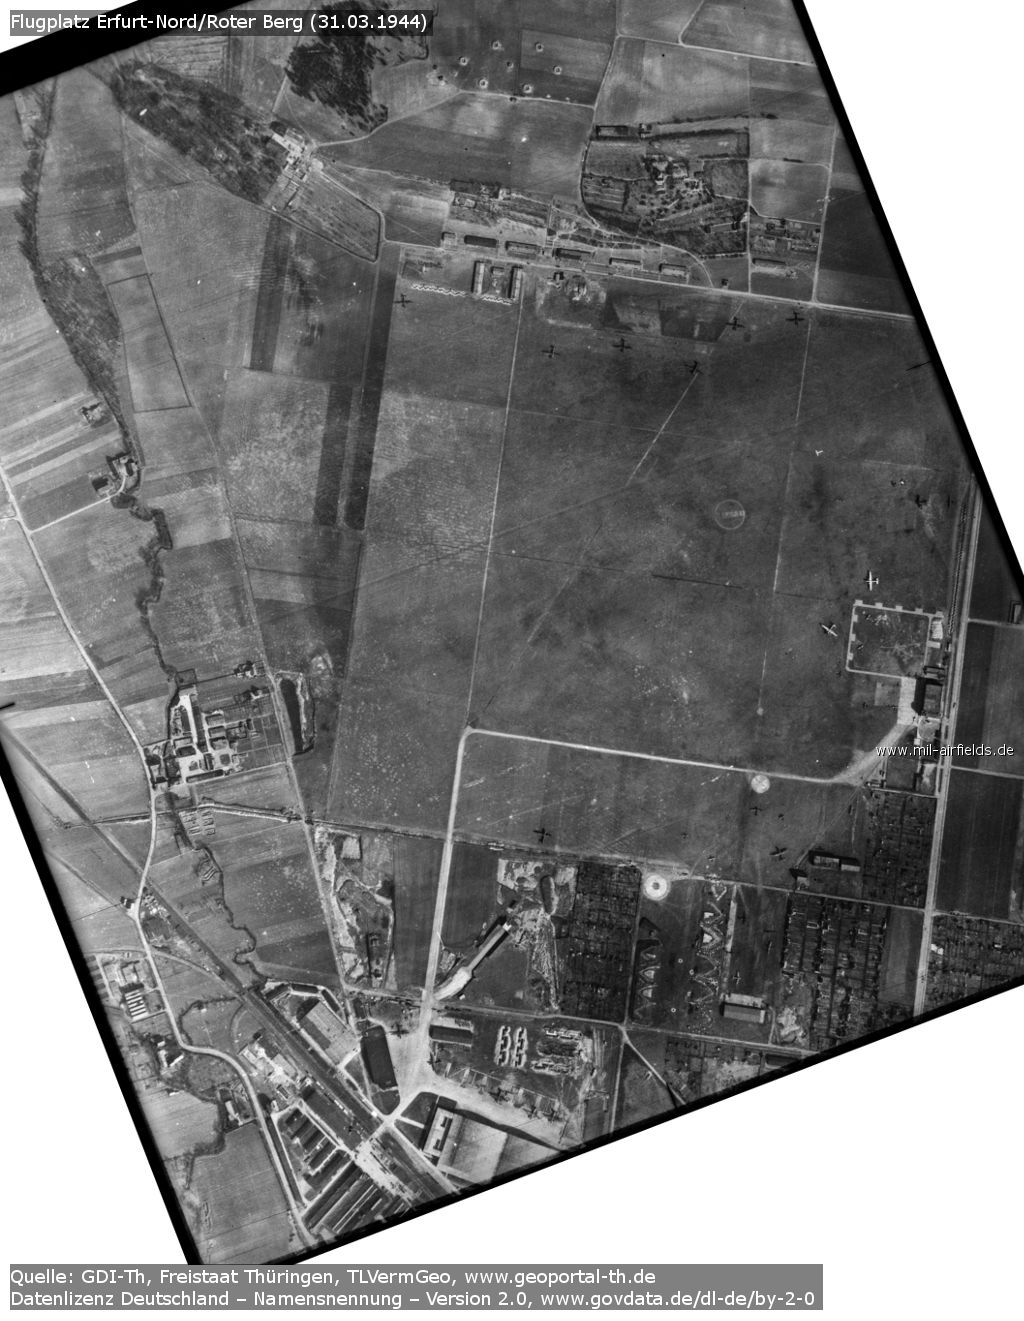 Aerial picture of Erfurt North airfield, Germany, from 31 March 1944